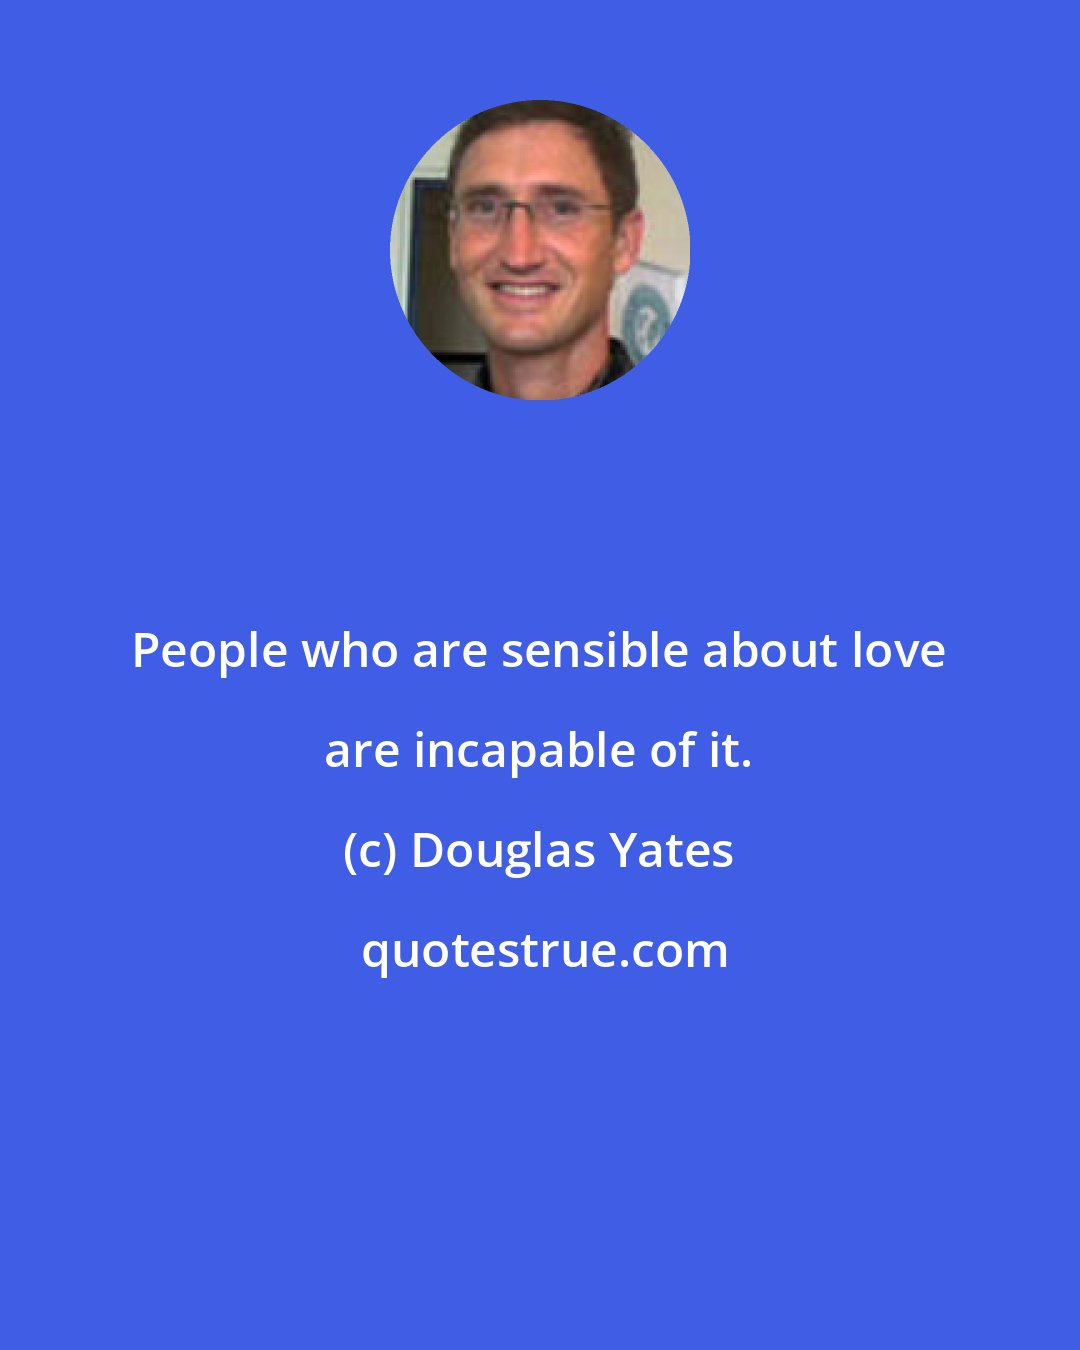 Douglas Yates: People who are sensible about love are incapable of it.